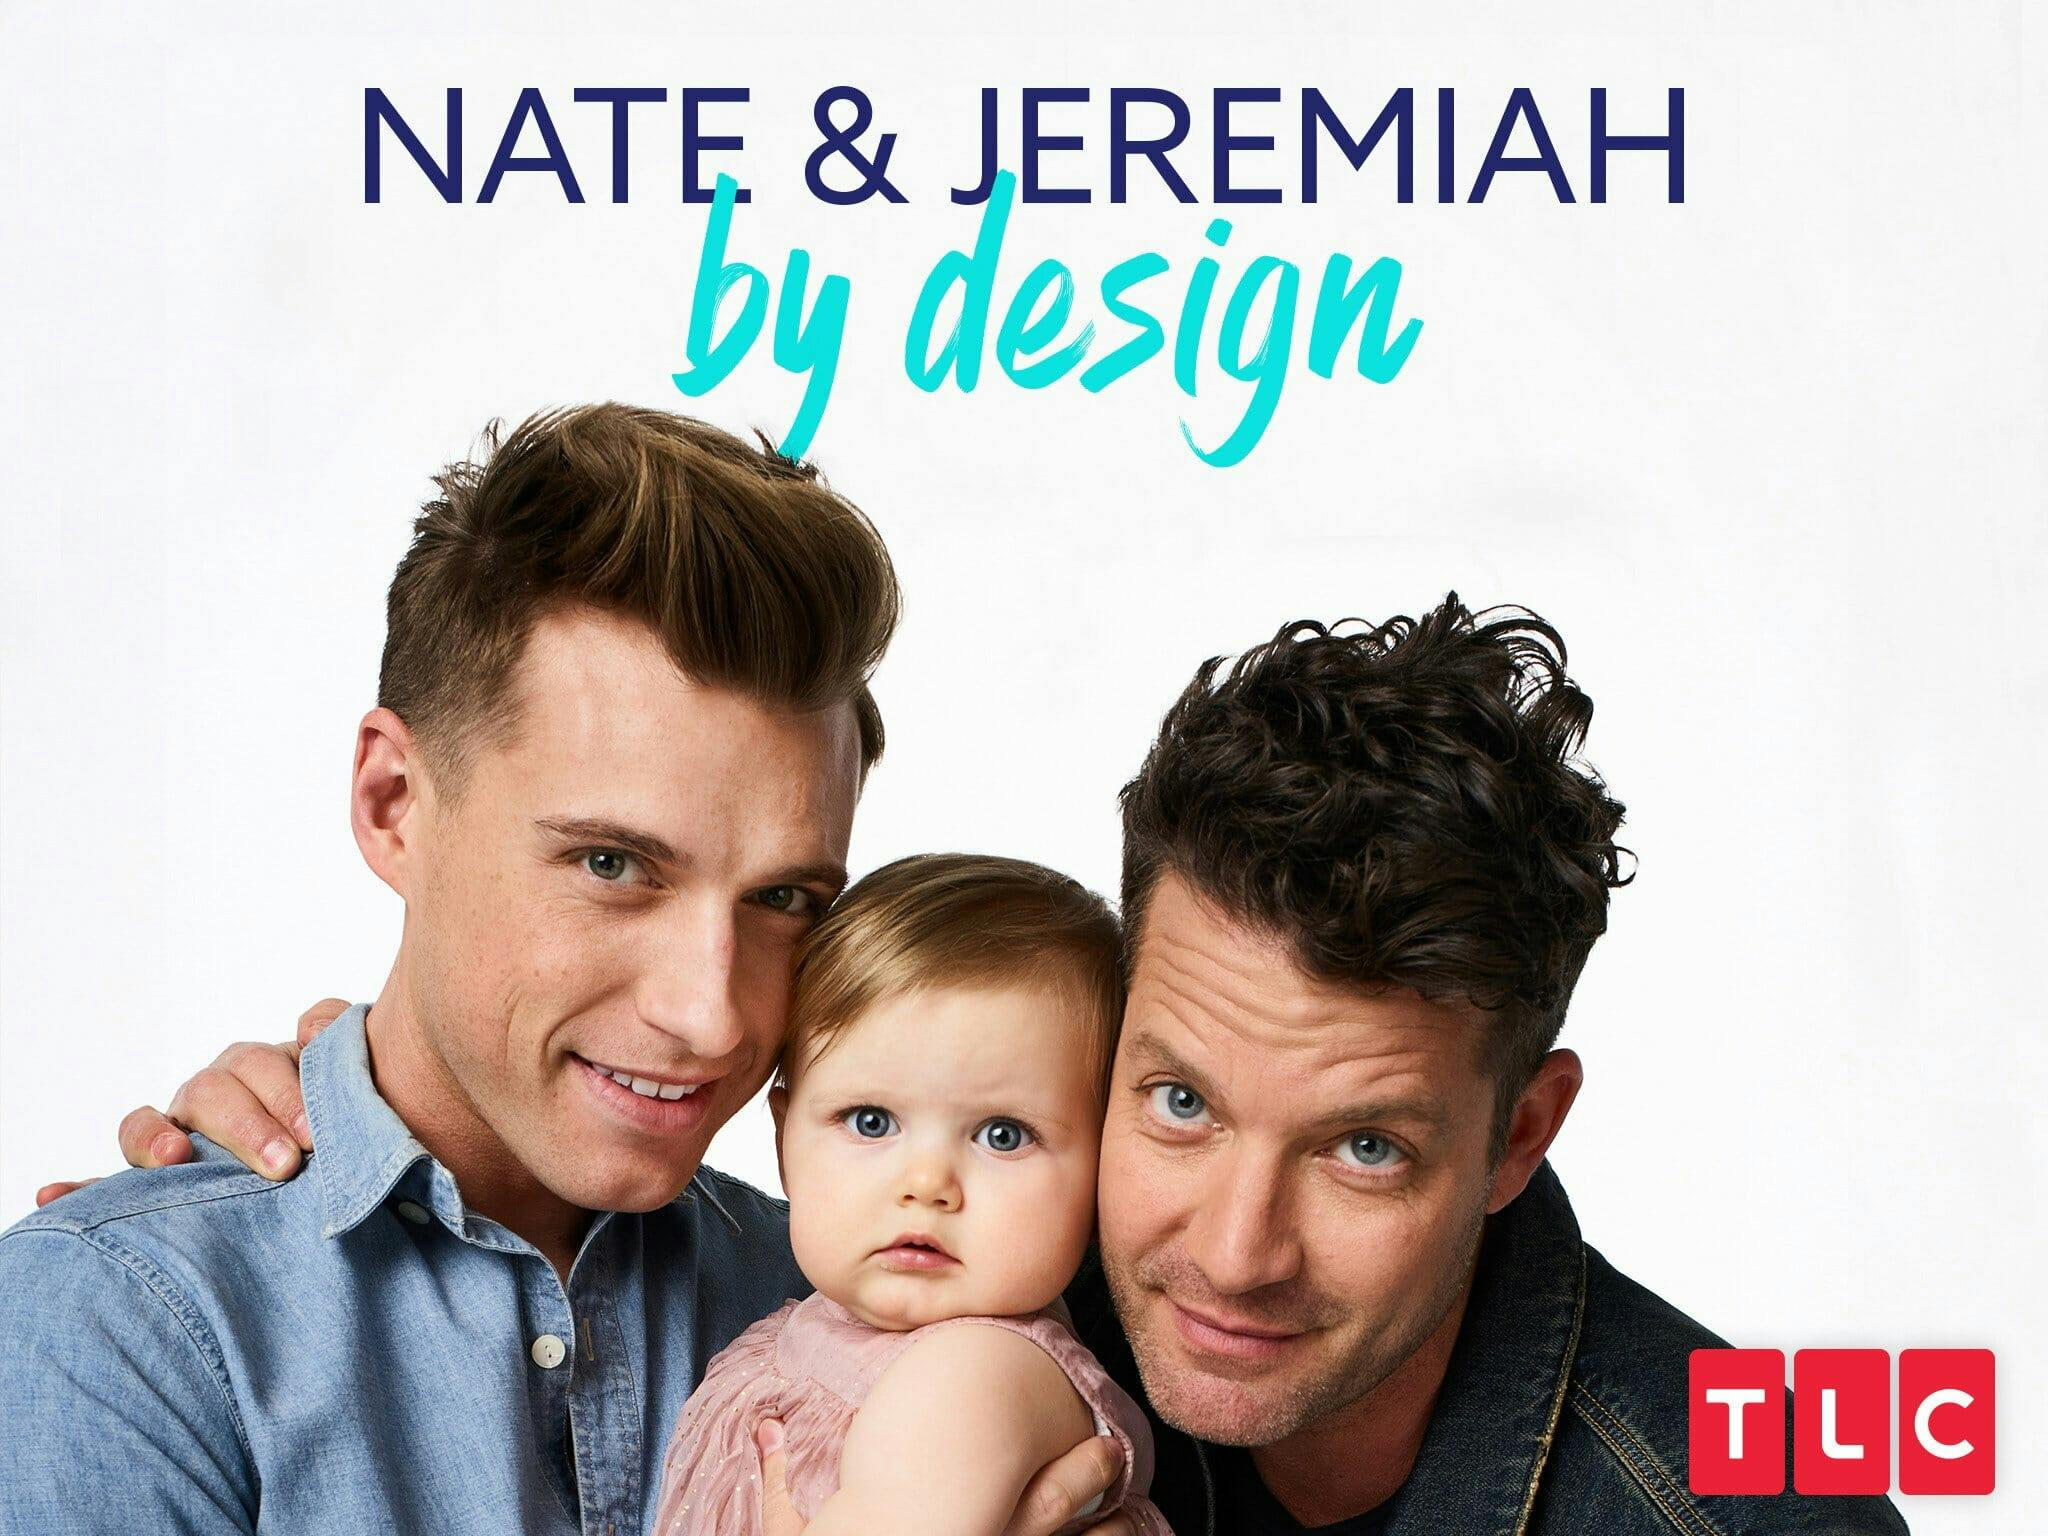 watch Nate and Jeremiah by design season 3 online free on Amazon